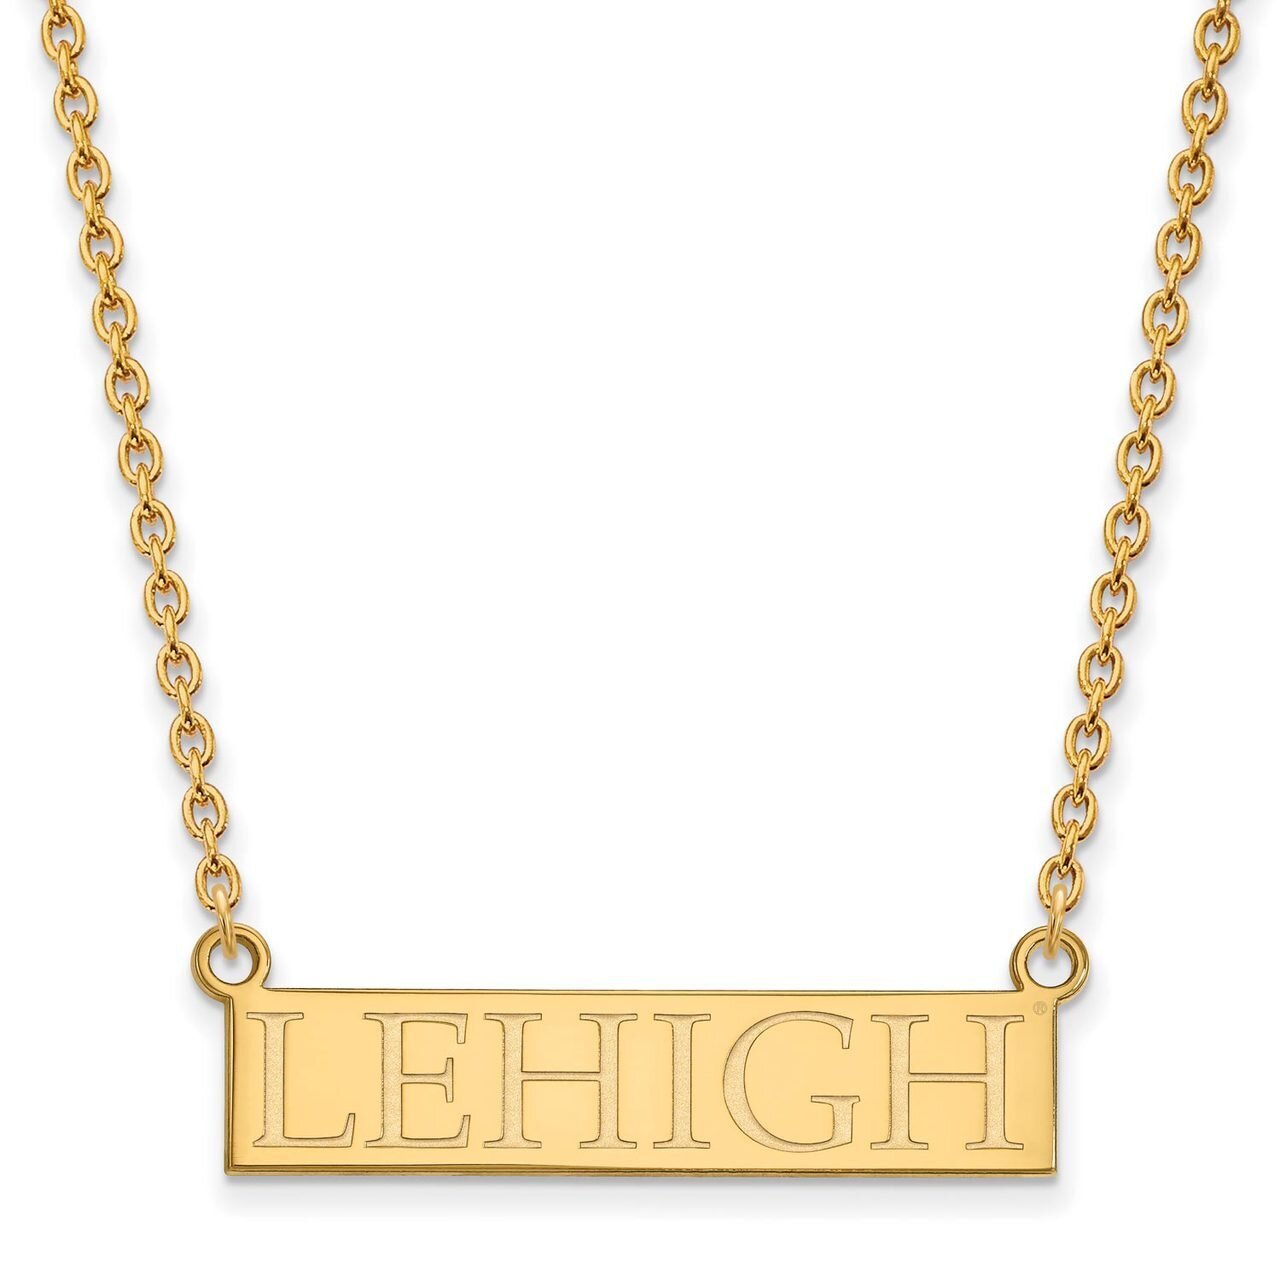 Lehigh University Large Pendant with Chain Necklace Gold-plated Silver GP007LHU-18